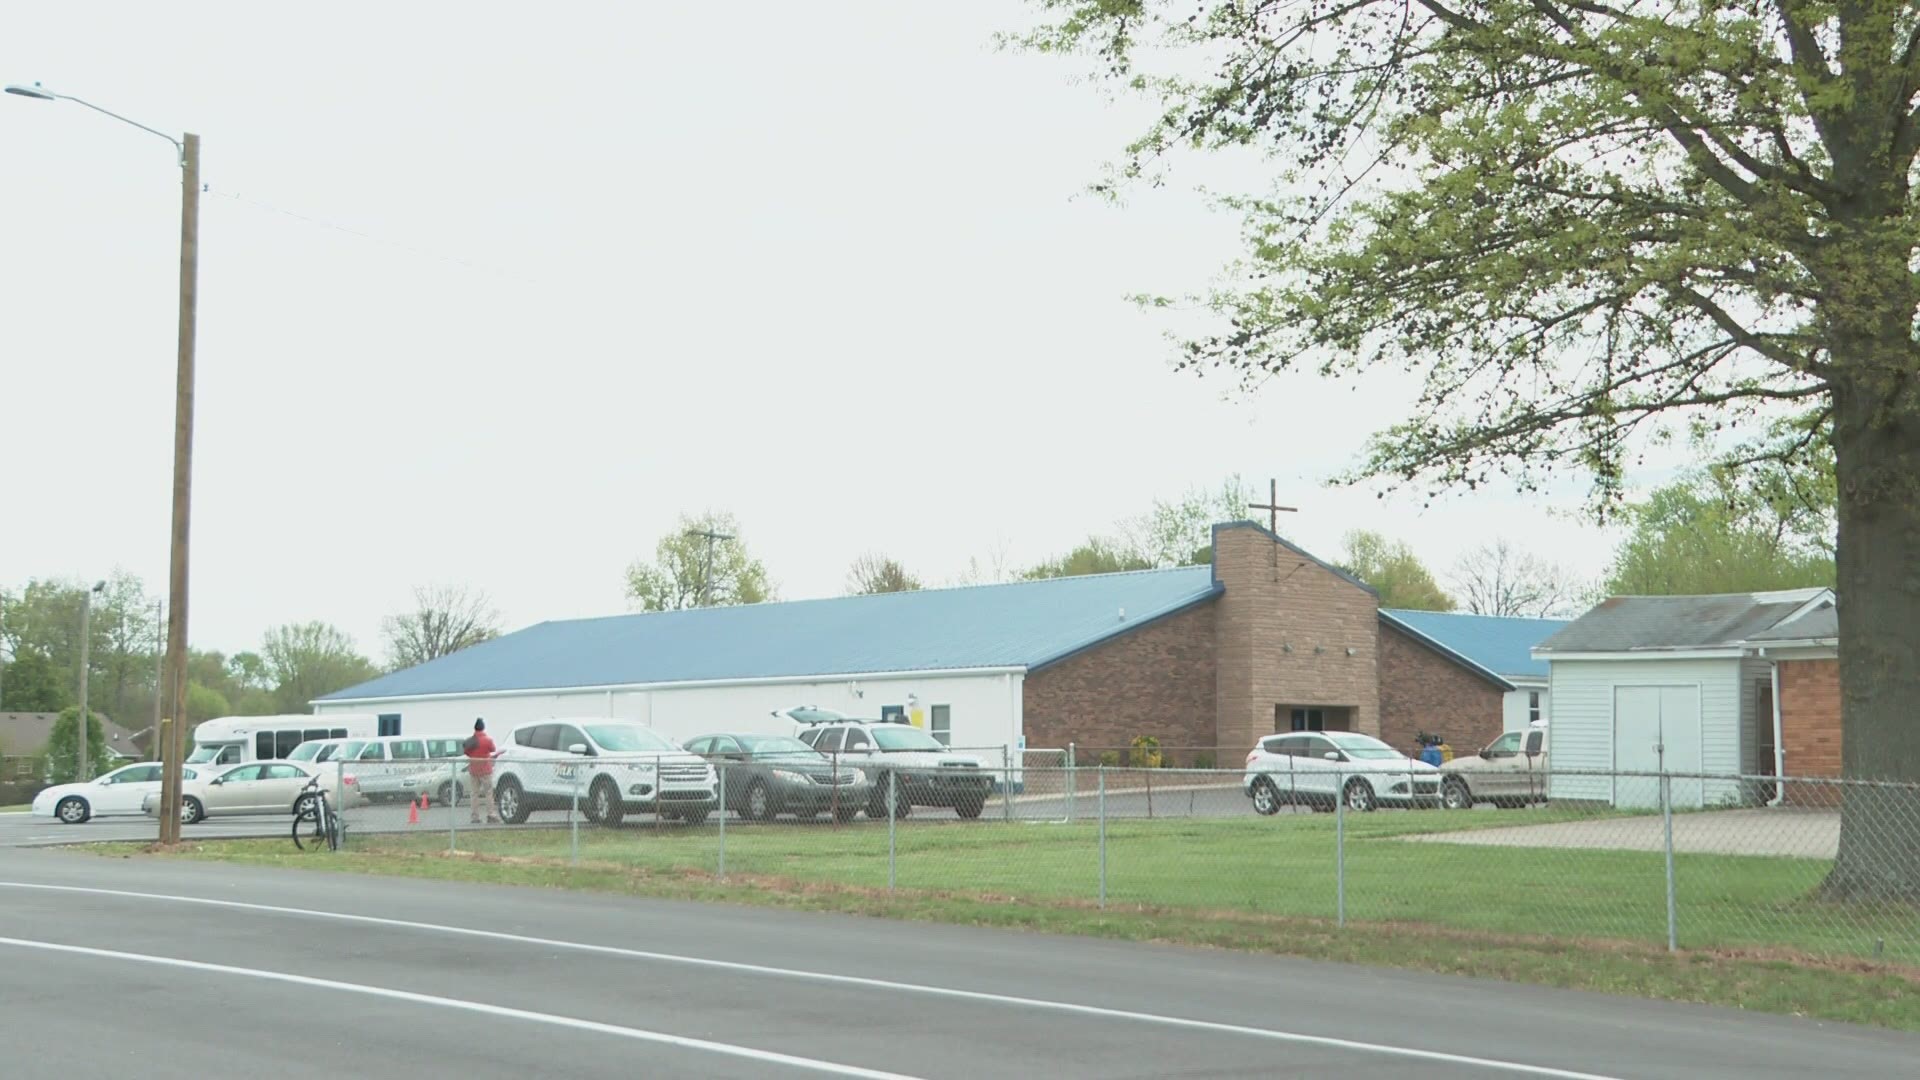 Around 200 students were in the clasroom at MICAH School at Maryville Baptist Church despite a Court of Appeals ruling upholding Beshear's order.